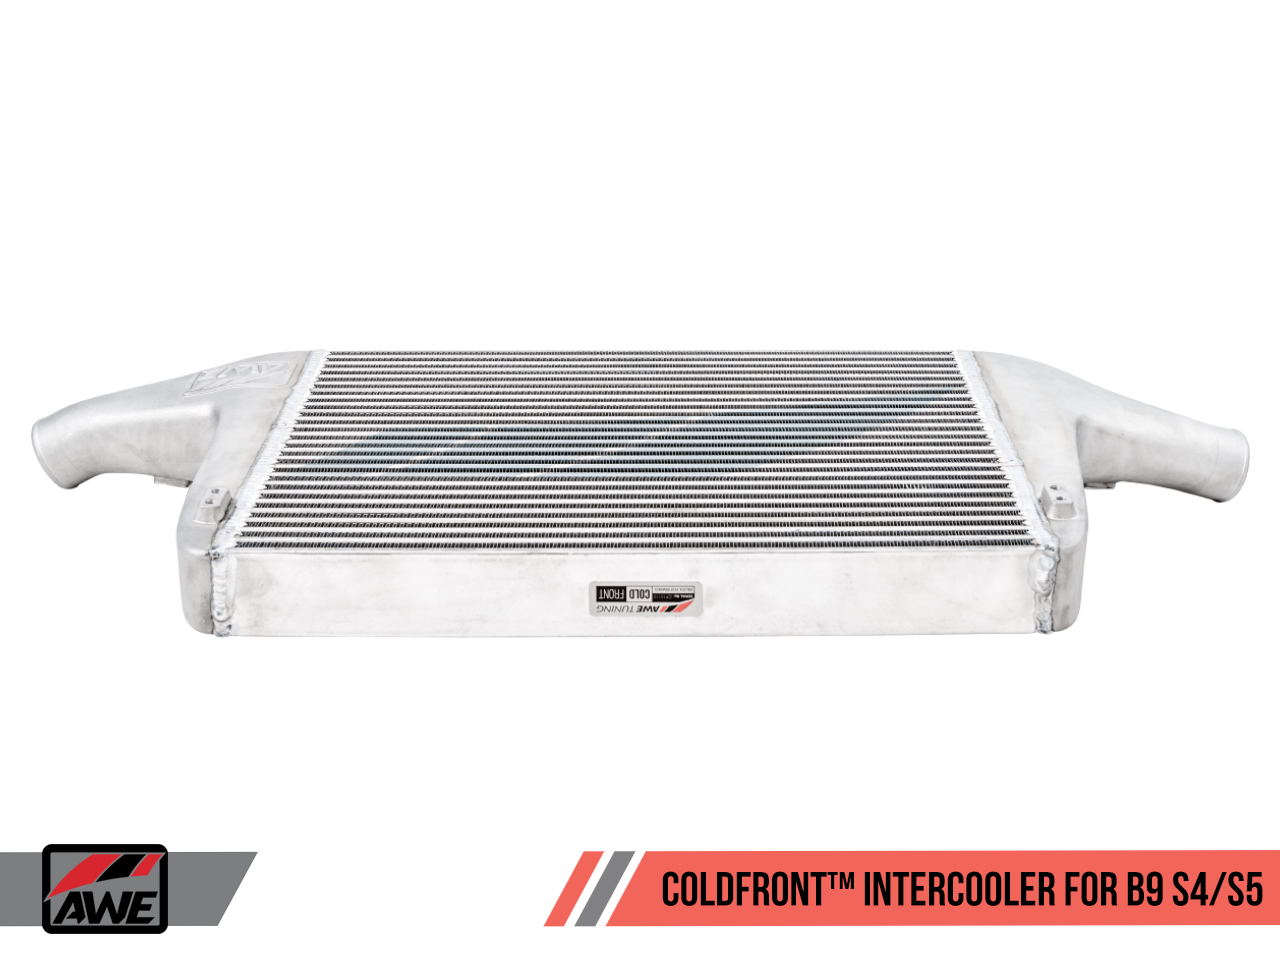 AWE ColdFront™ Intercooler for the Audi B9 S4 / S5 3.0T